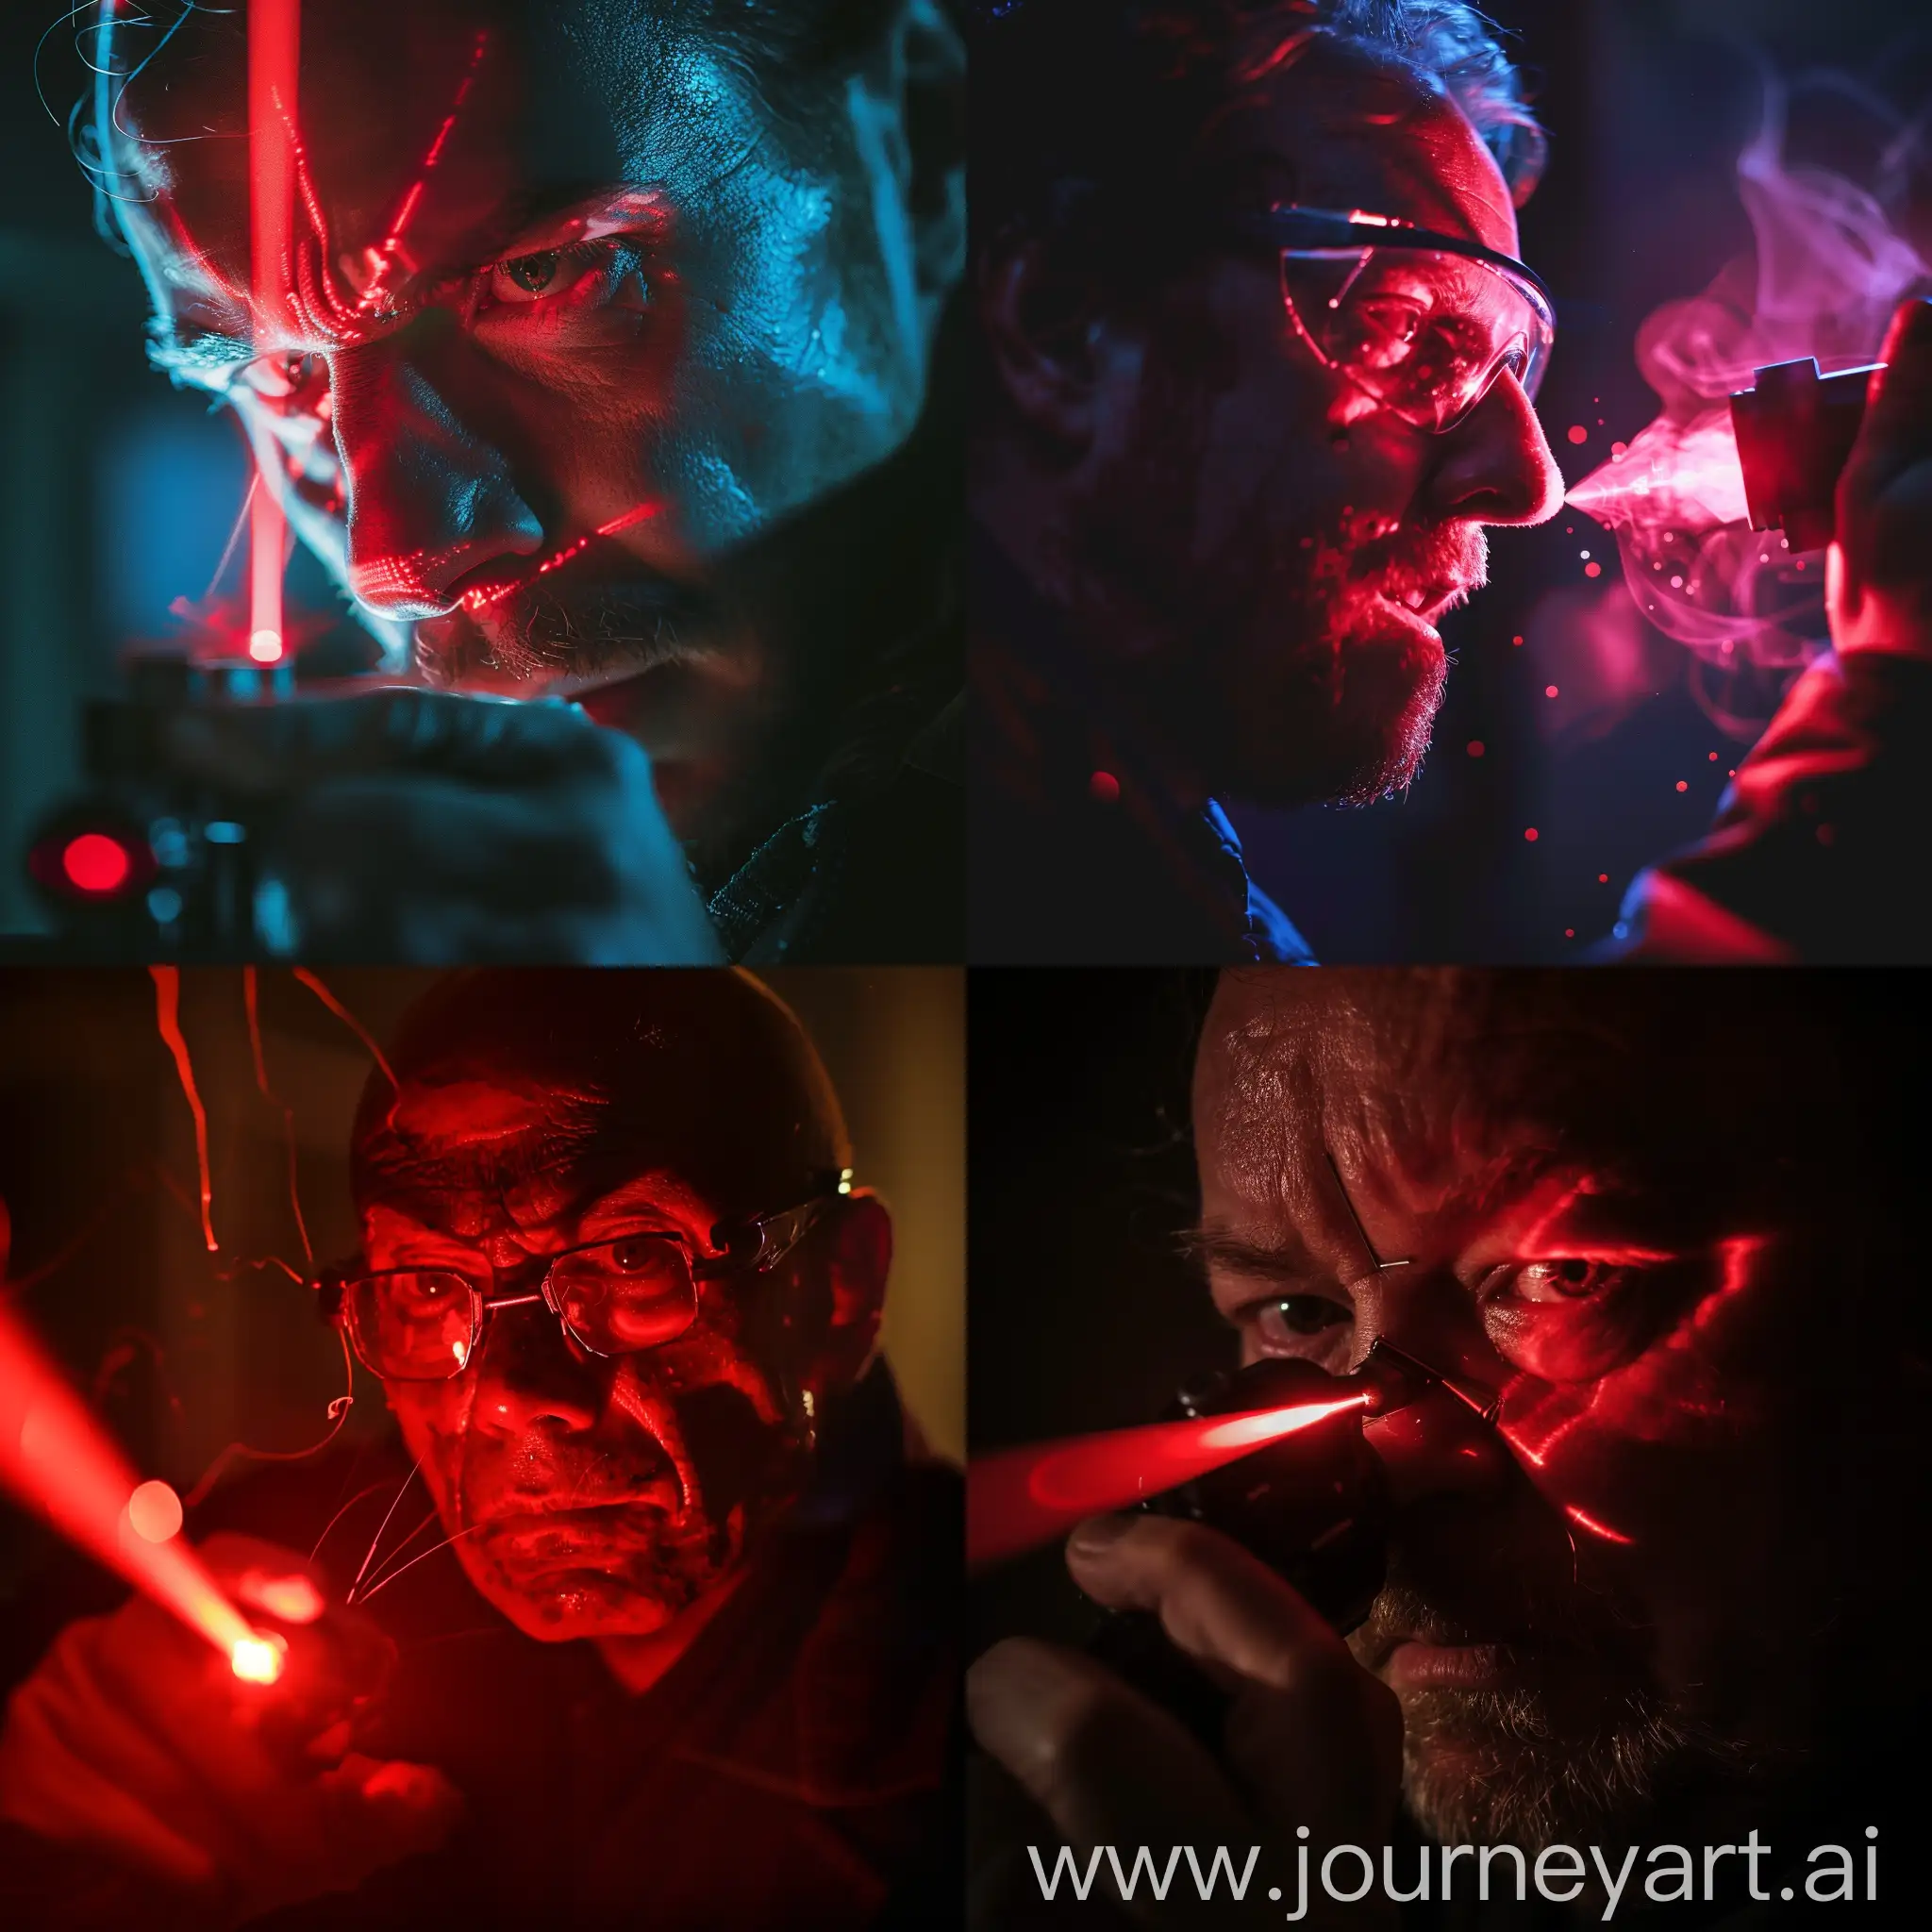 The scientist holds a laser in his hand, which shines a red beam in his face. The scientist burns his face slightly with a red beam of laser light. He winces and releases the laser from his hands.